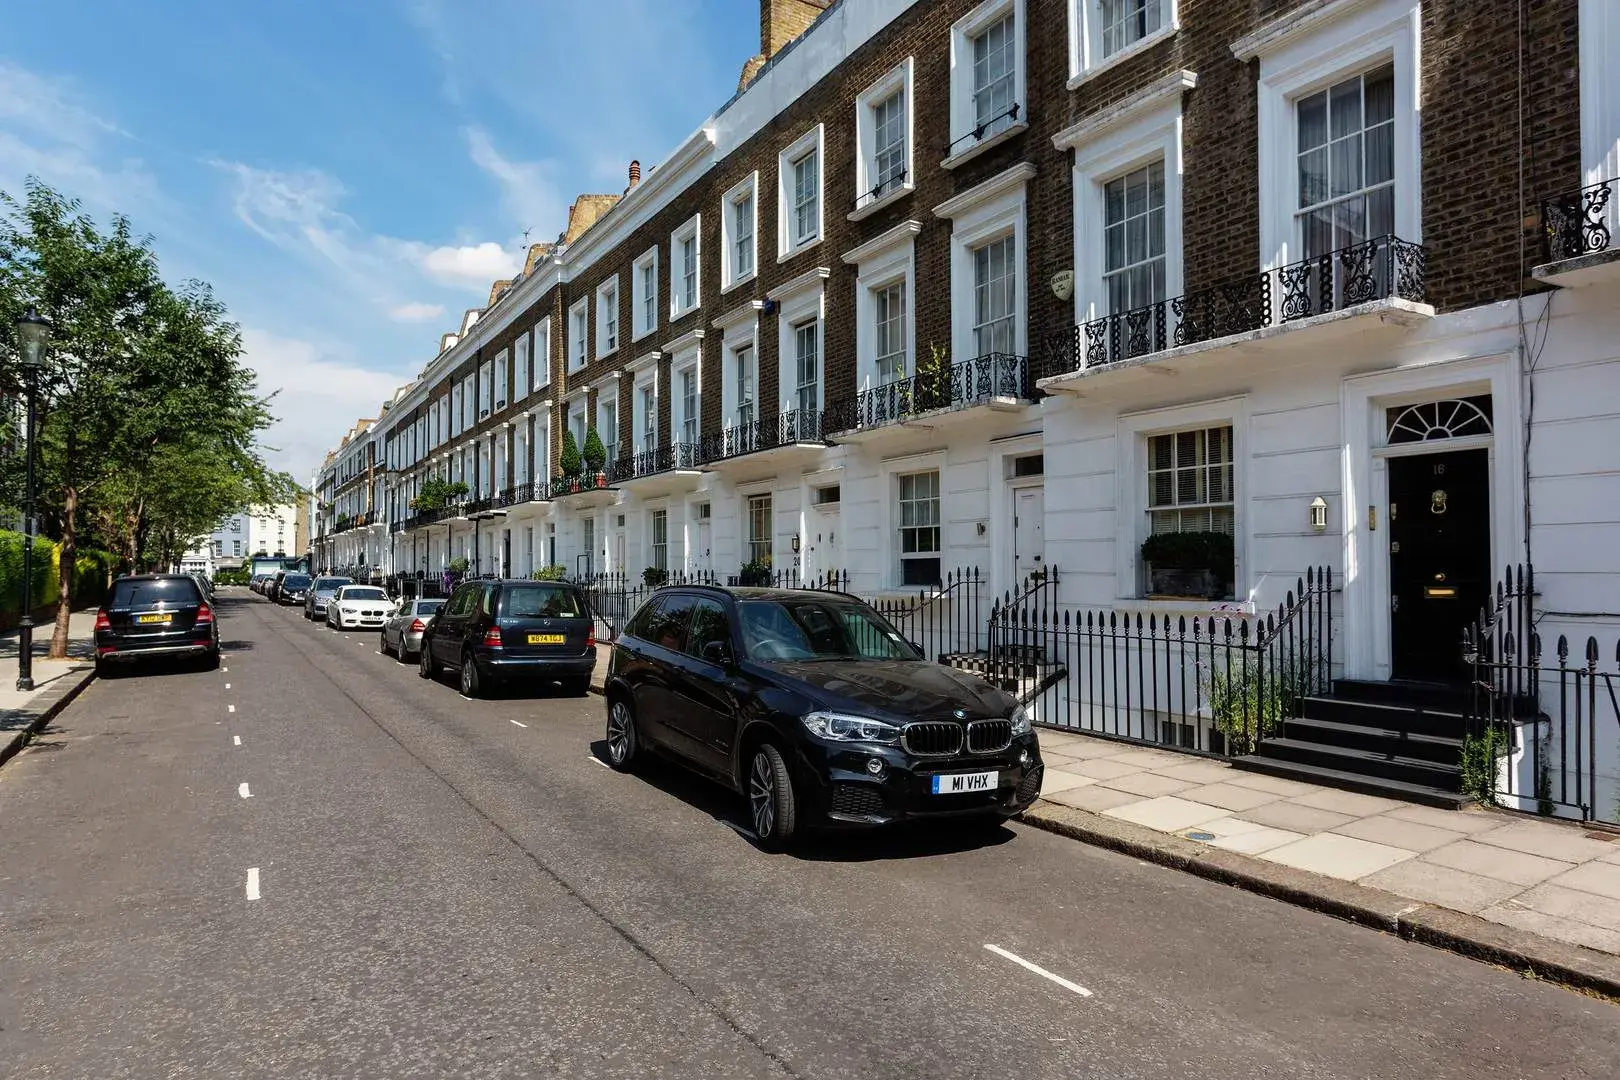 Rawlings Street, holiday home in Chelsea, London